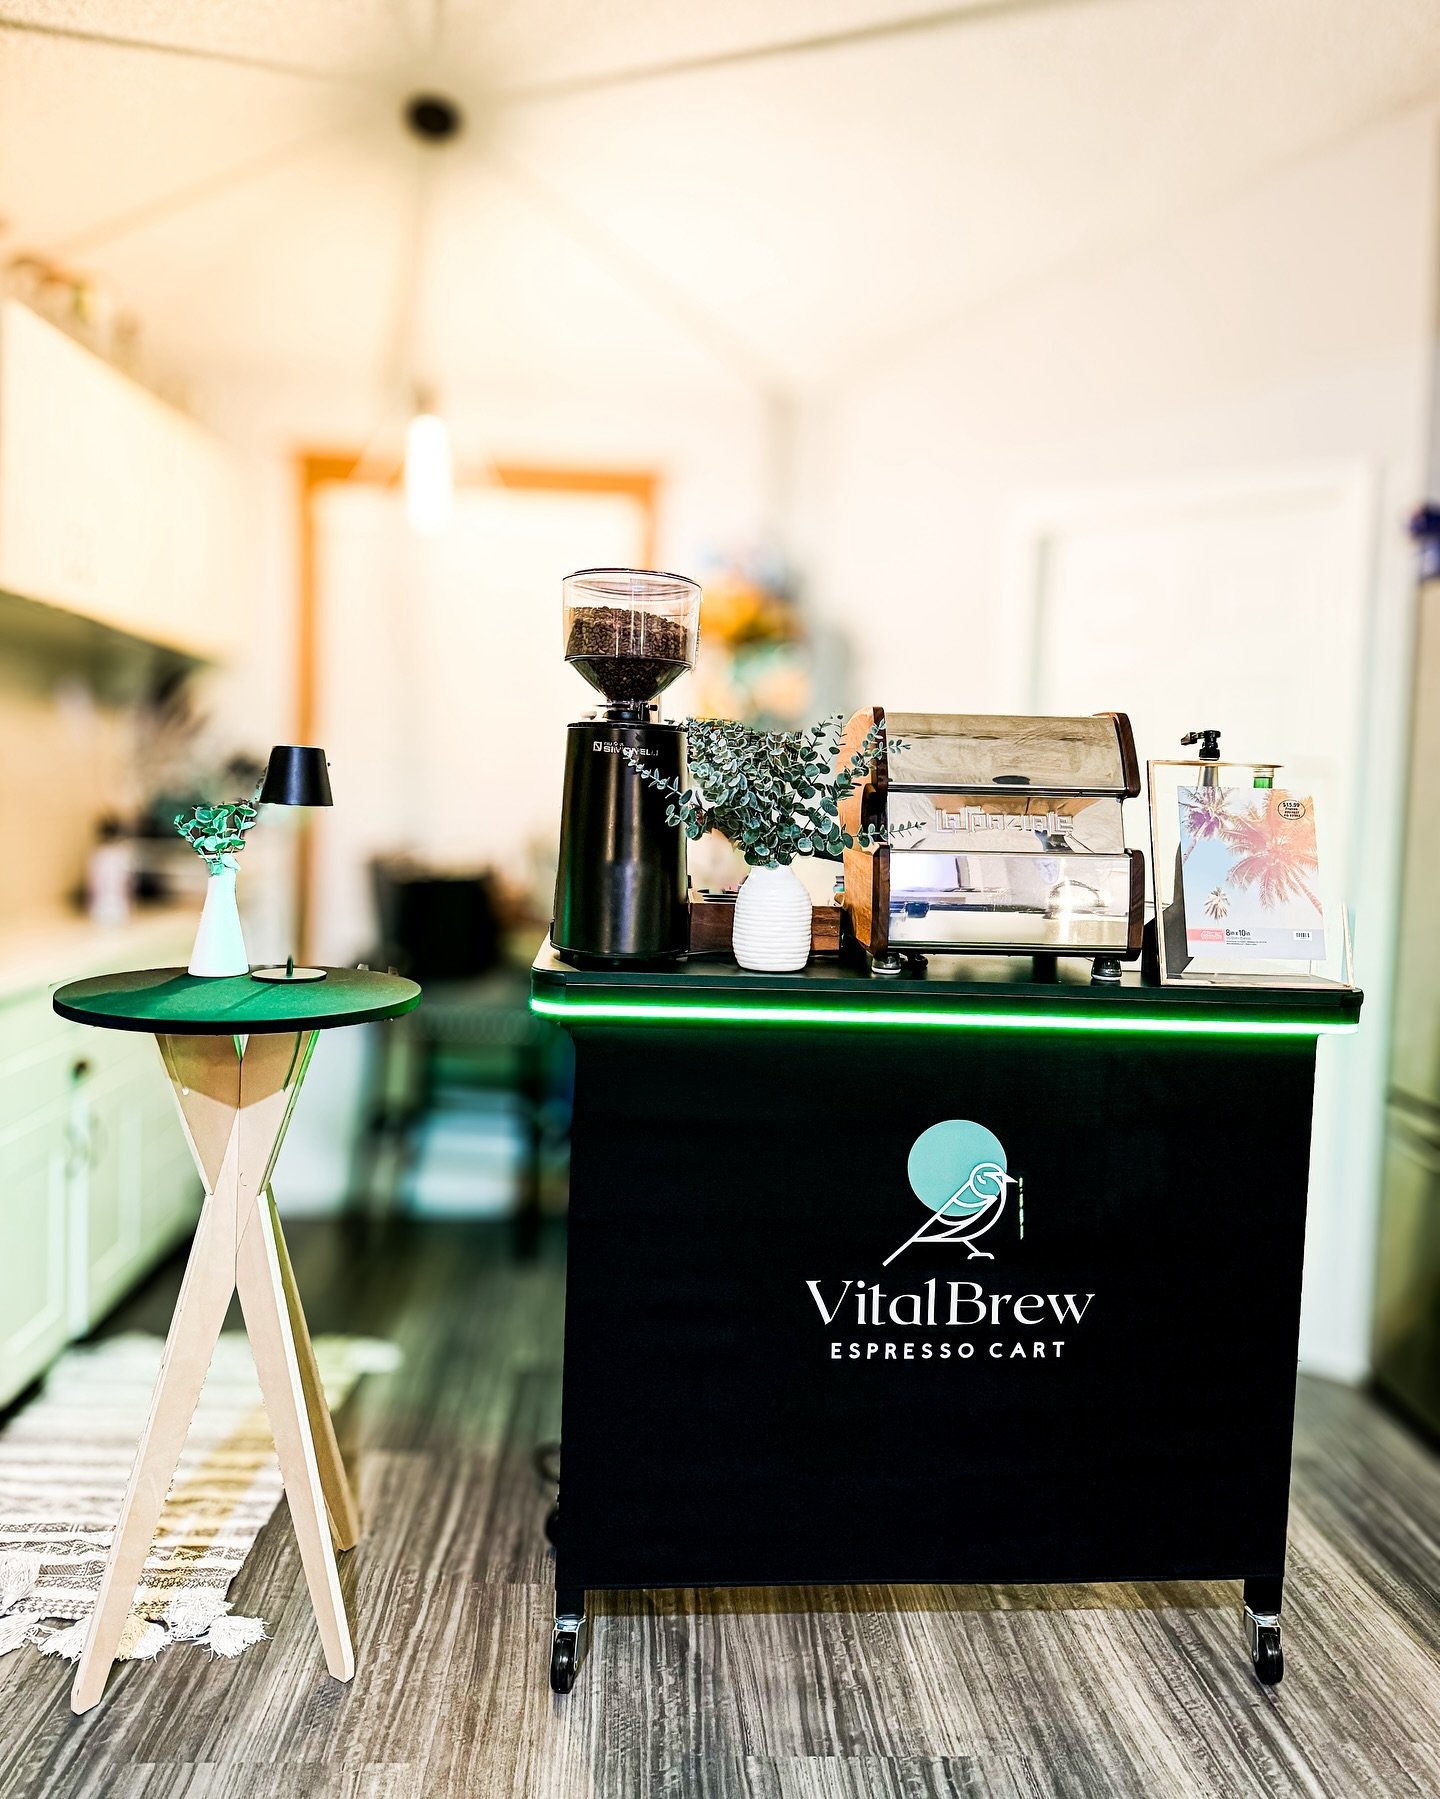 Our NEW Micro-Cart setup! 
Let us know what you think ? 🙌🏼😉☕️

If you would like to see this setup at your next event, DM us to book the coffee cart or visit our website:

📍www.vitalbrewcart.com

🔜 Stay tuned for more coffee cart setup options ?